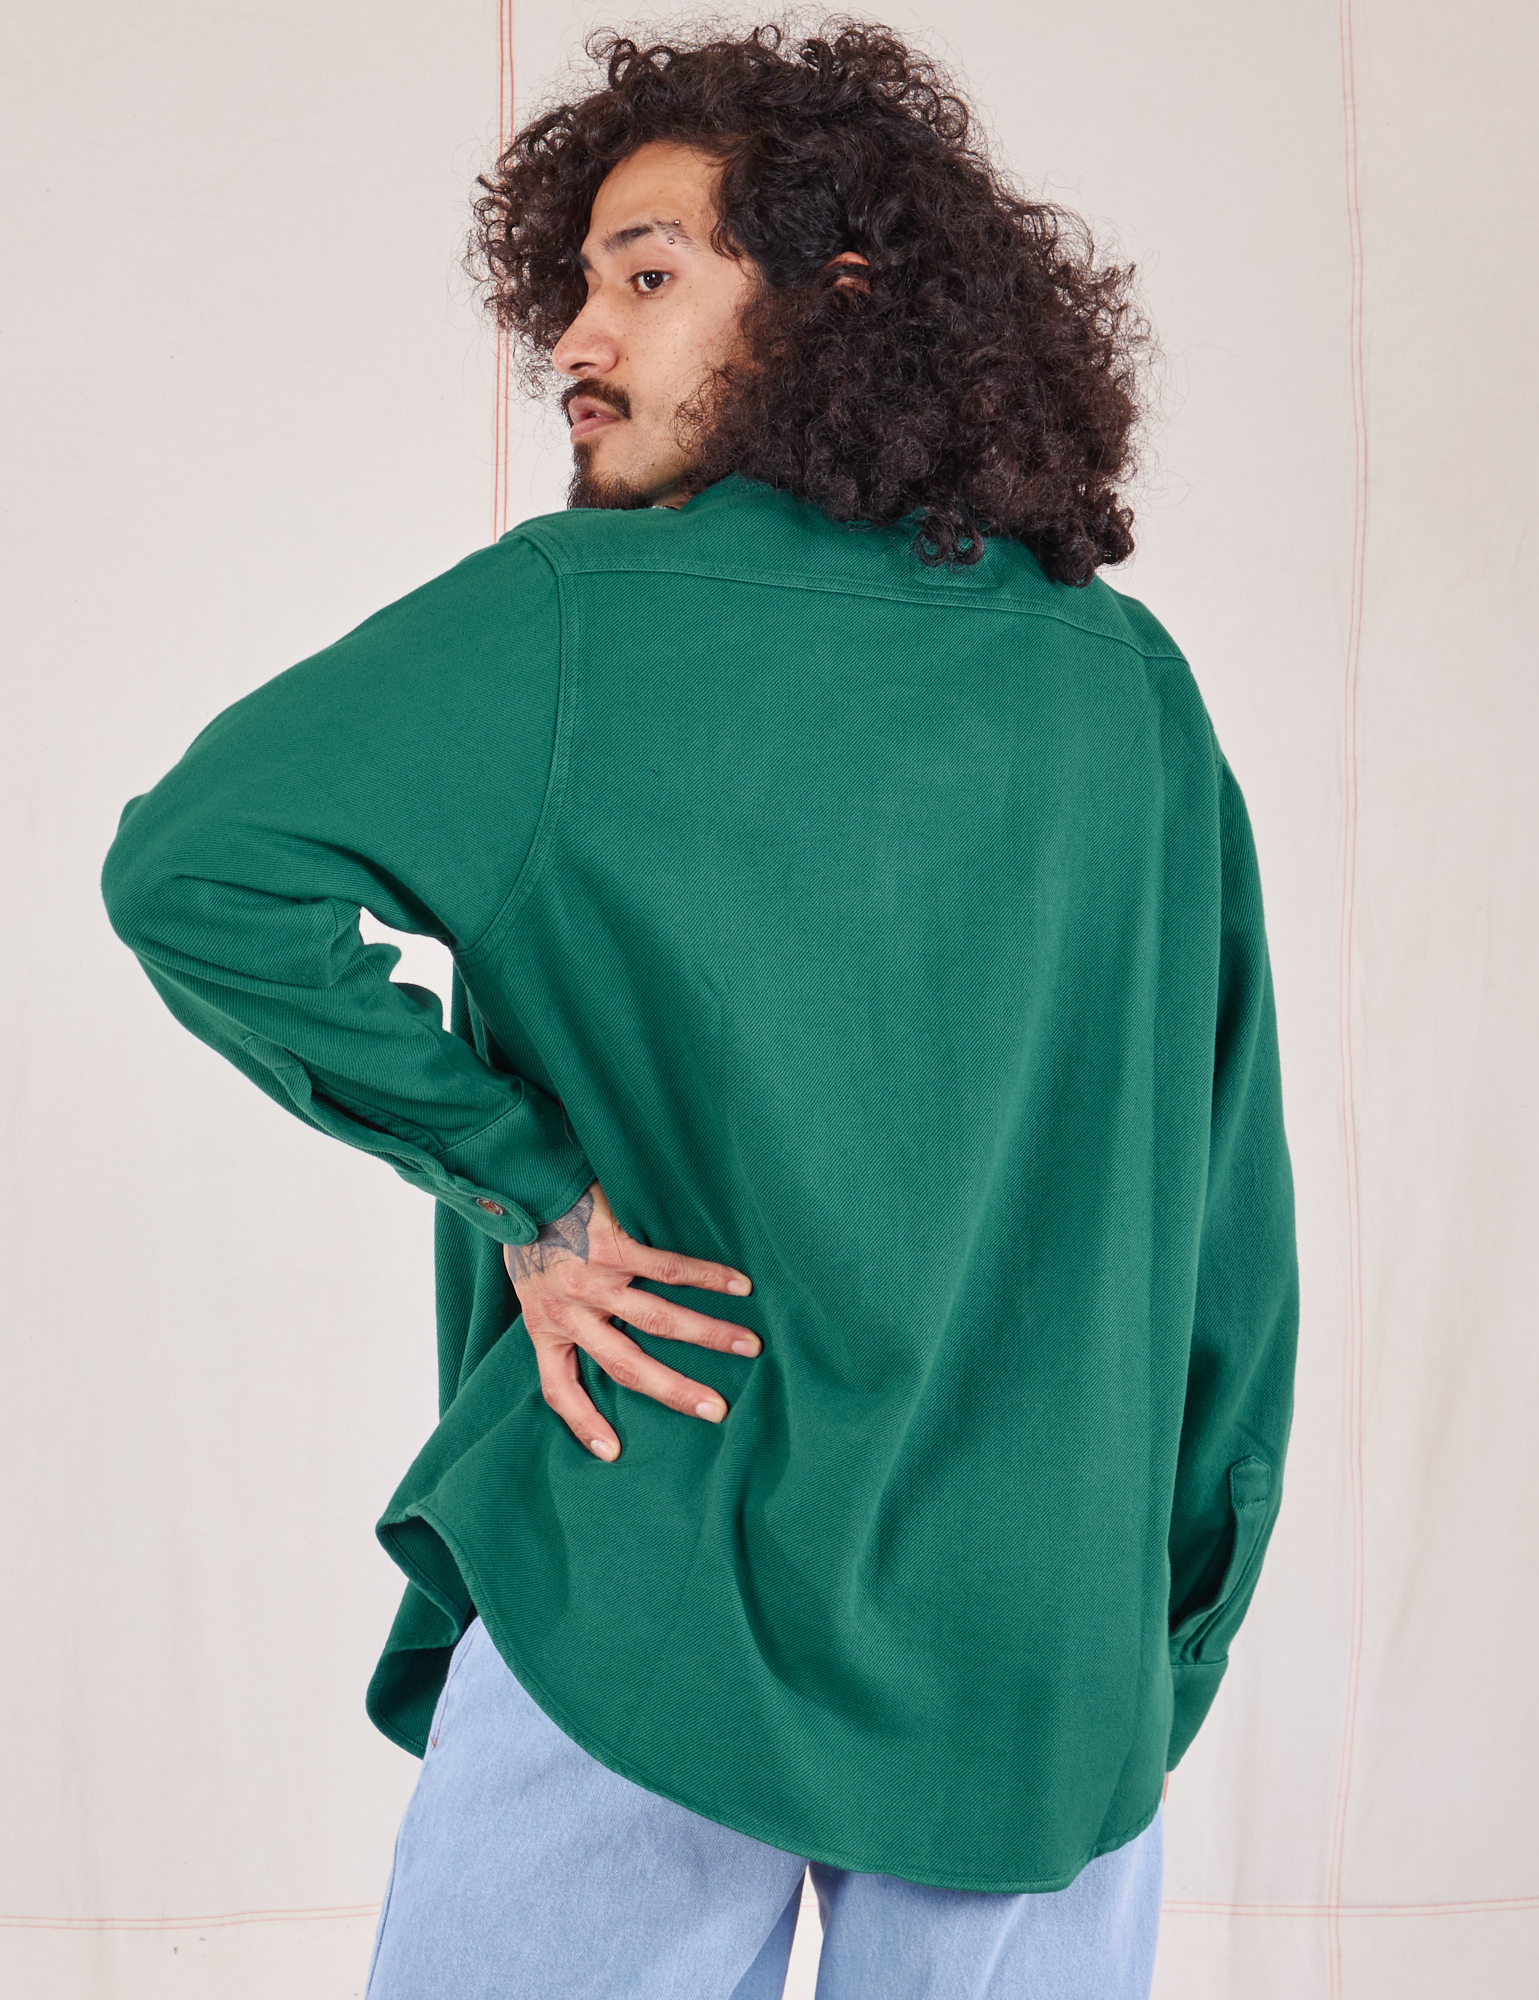 Back view of Flannel Overshirt in Hunter Green on Jesse